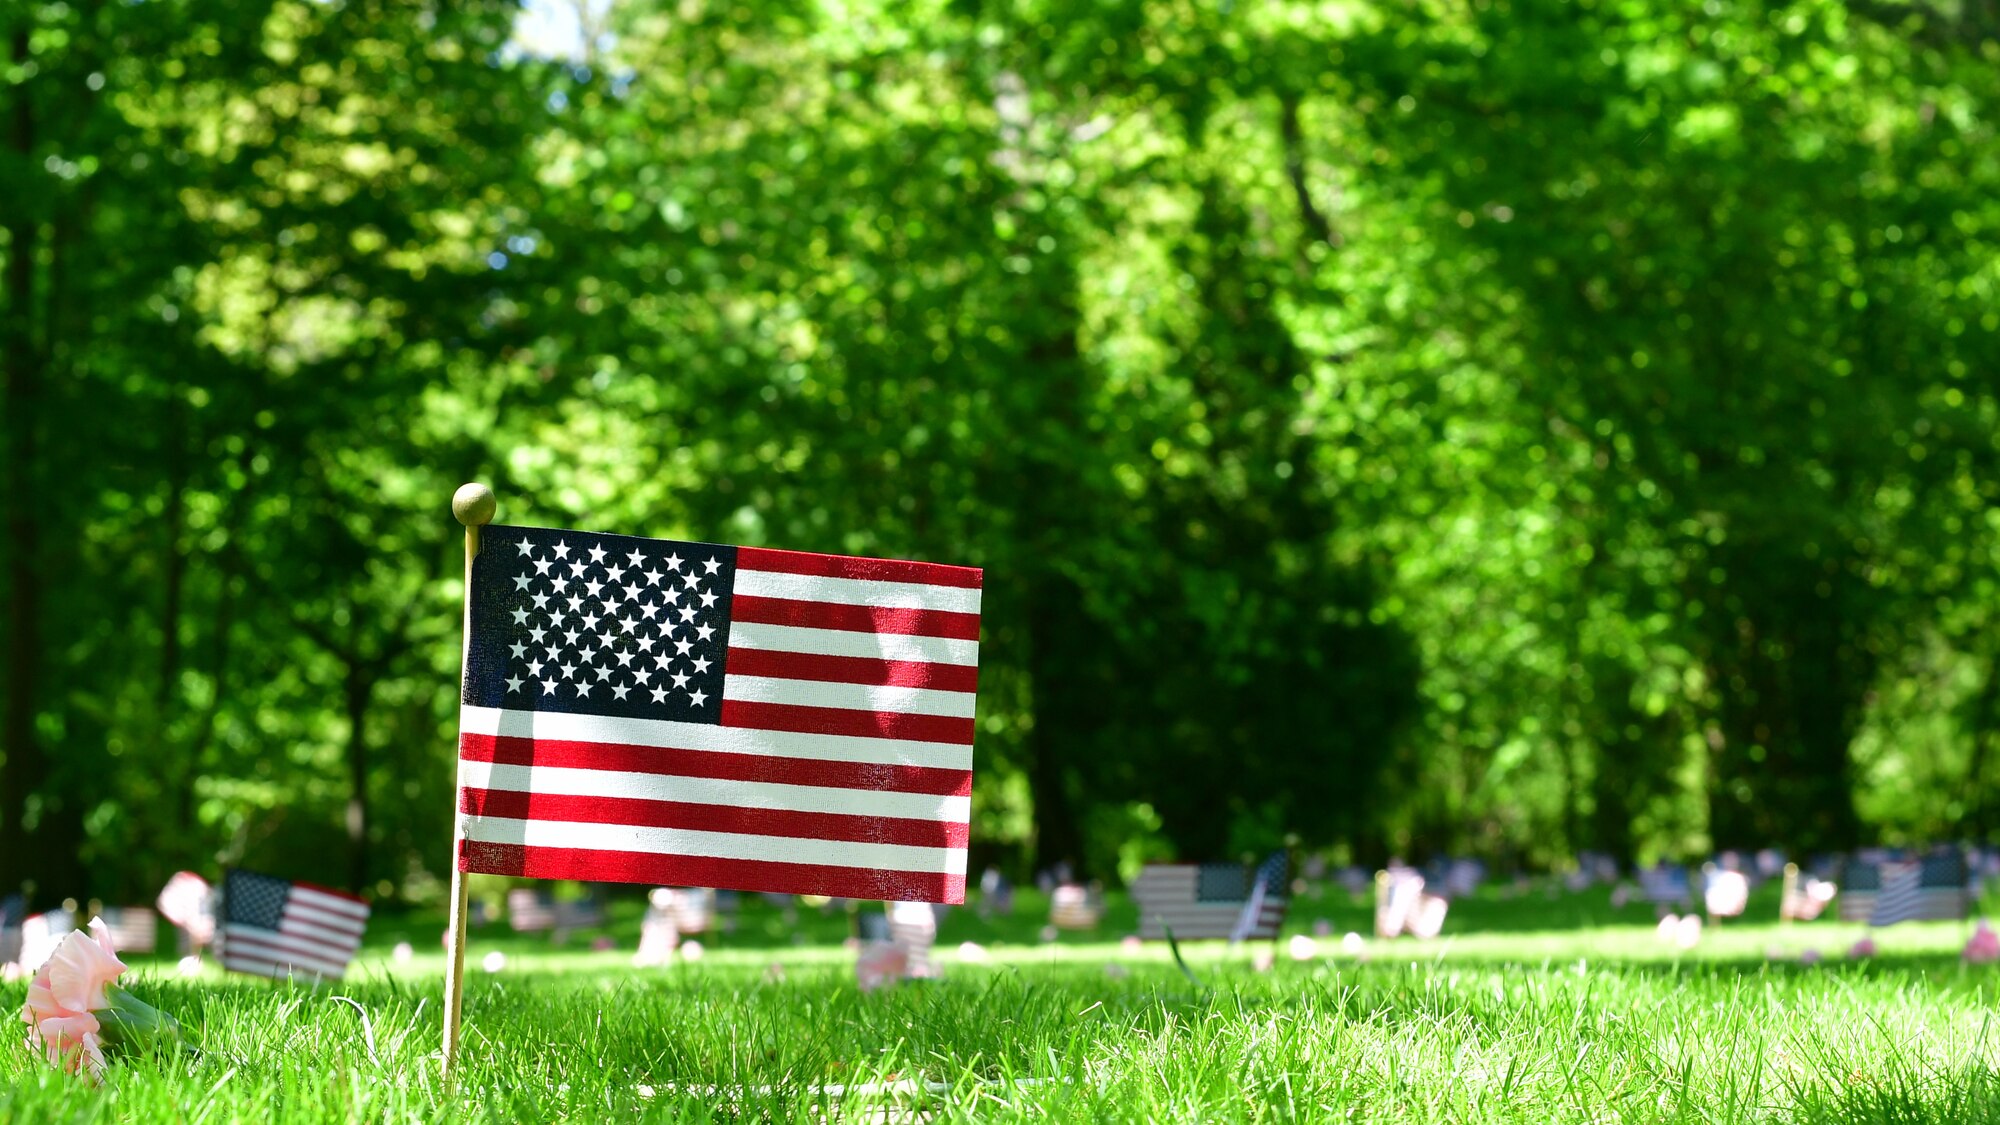 An American flag stands next to a grave at a memorial site in a cemetery.